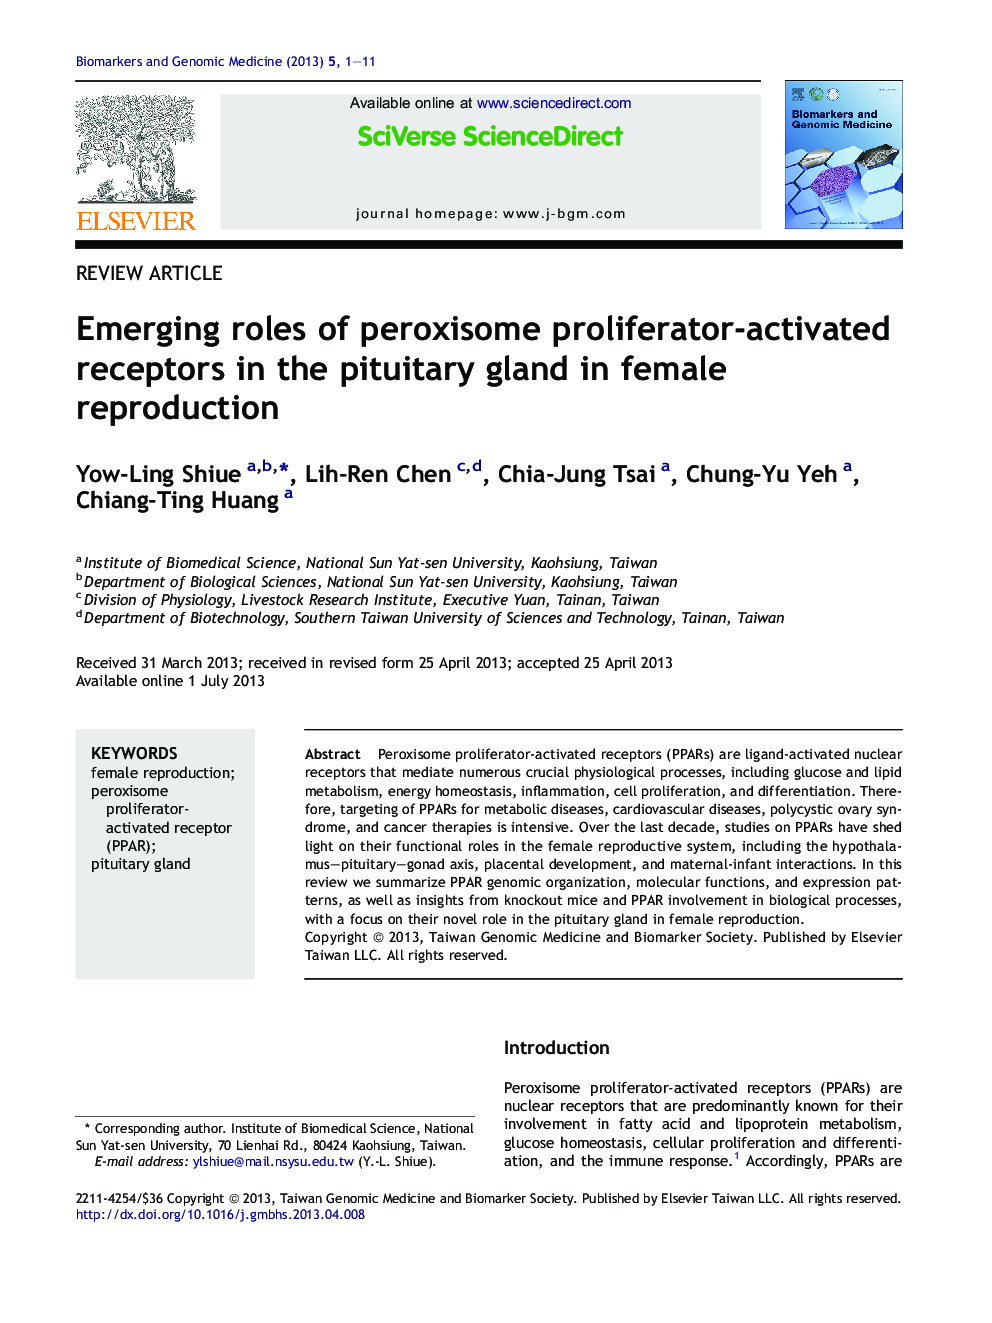 Emerging roles of peroxisome proliferator-activated receptors in the pituitary gland in female reproduction